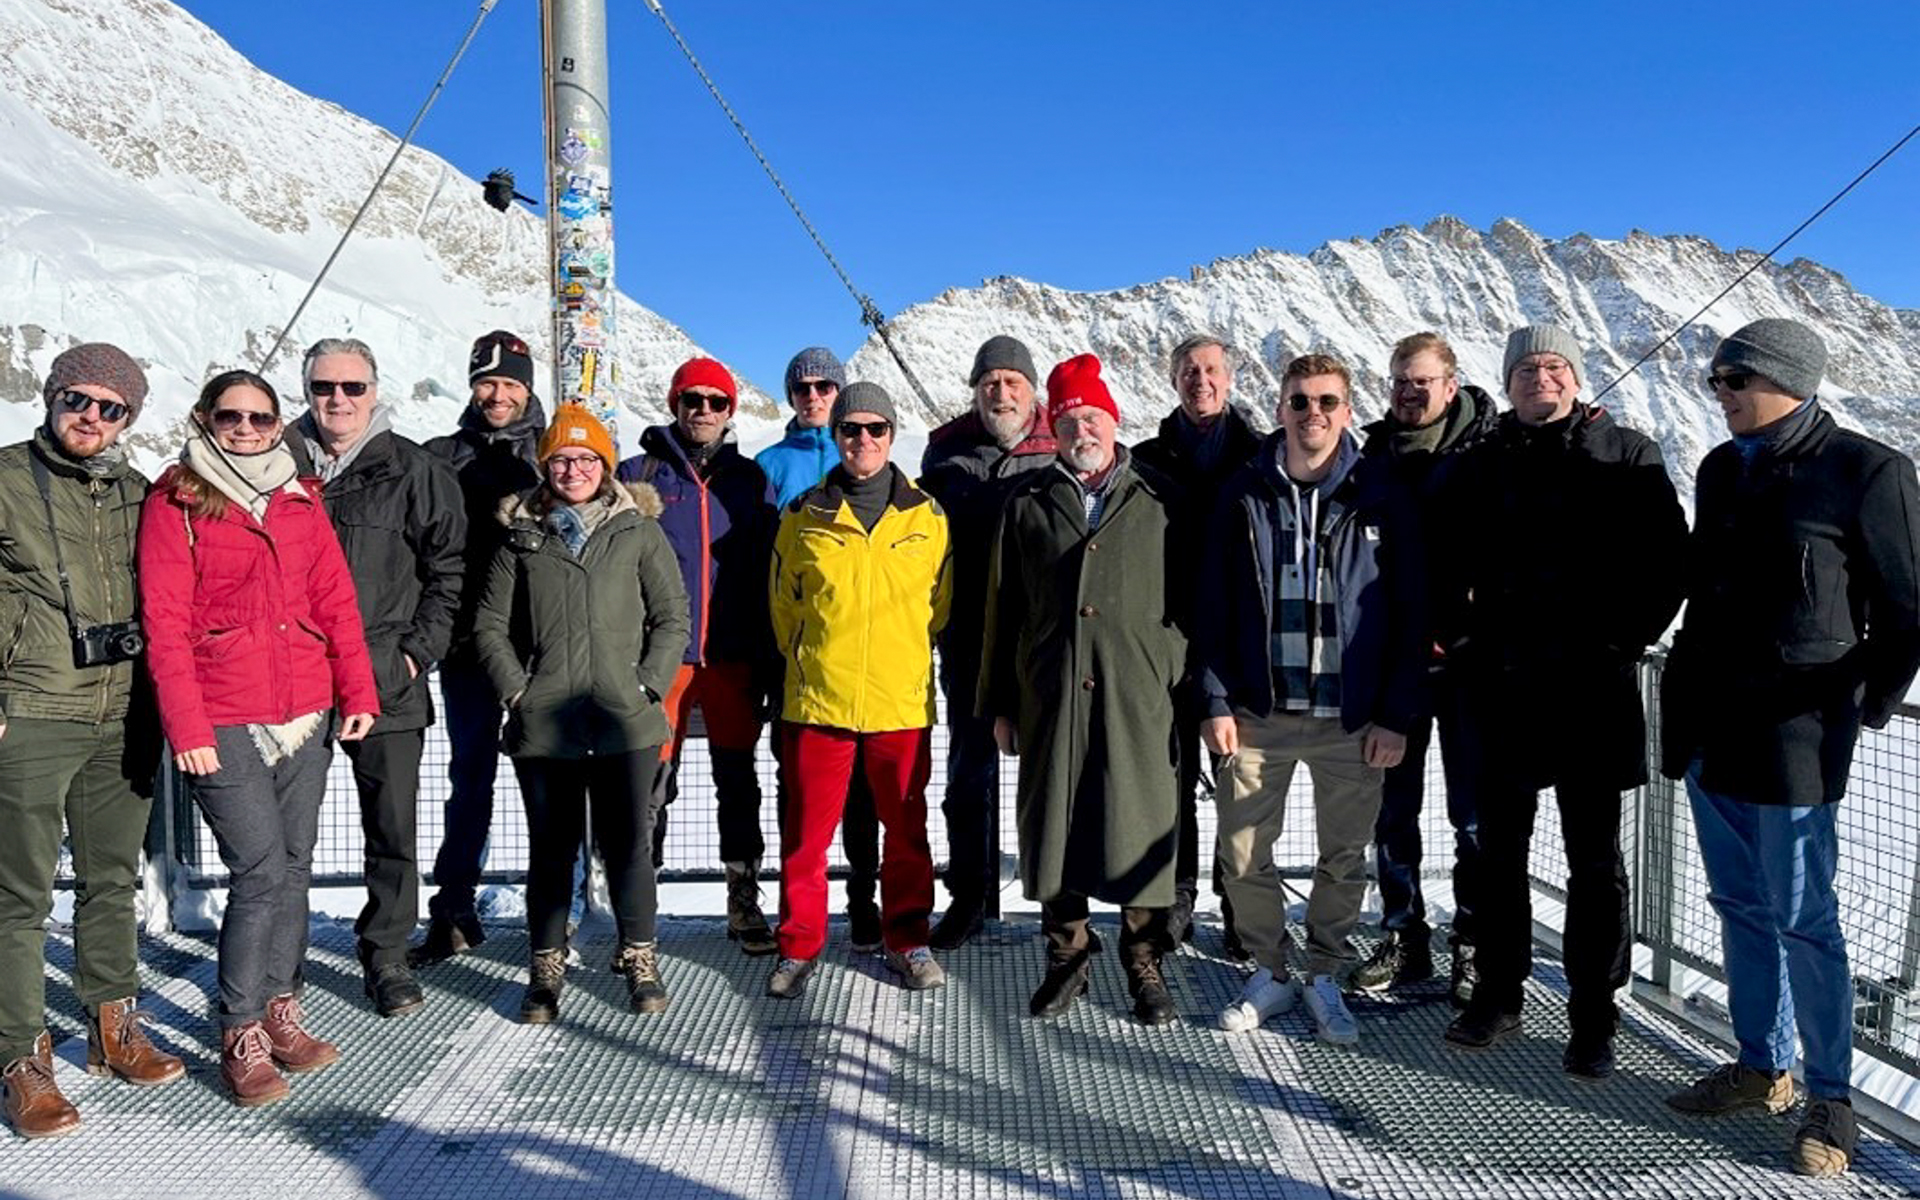 Group photo of the participants of the AHORN22 meeting. A mountain range is visible in the background.